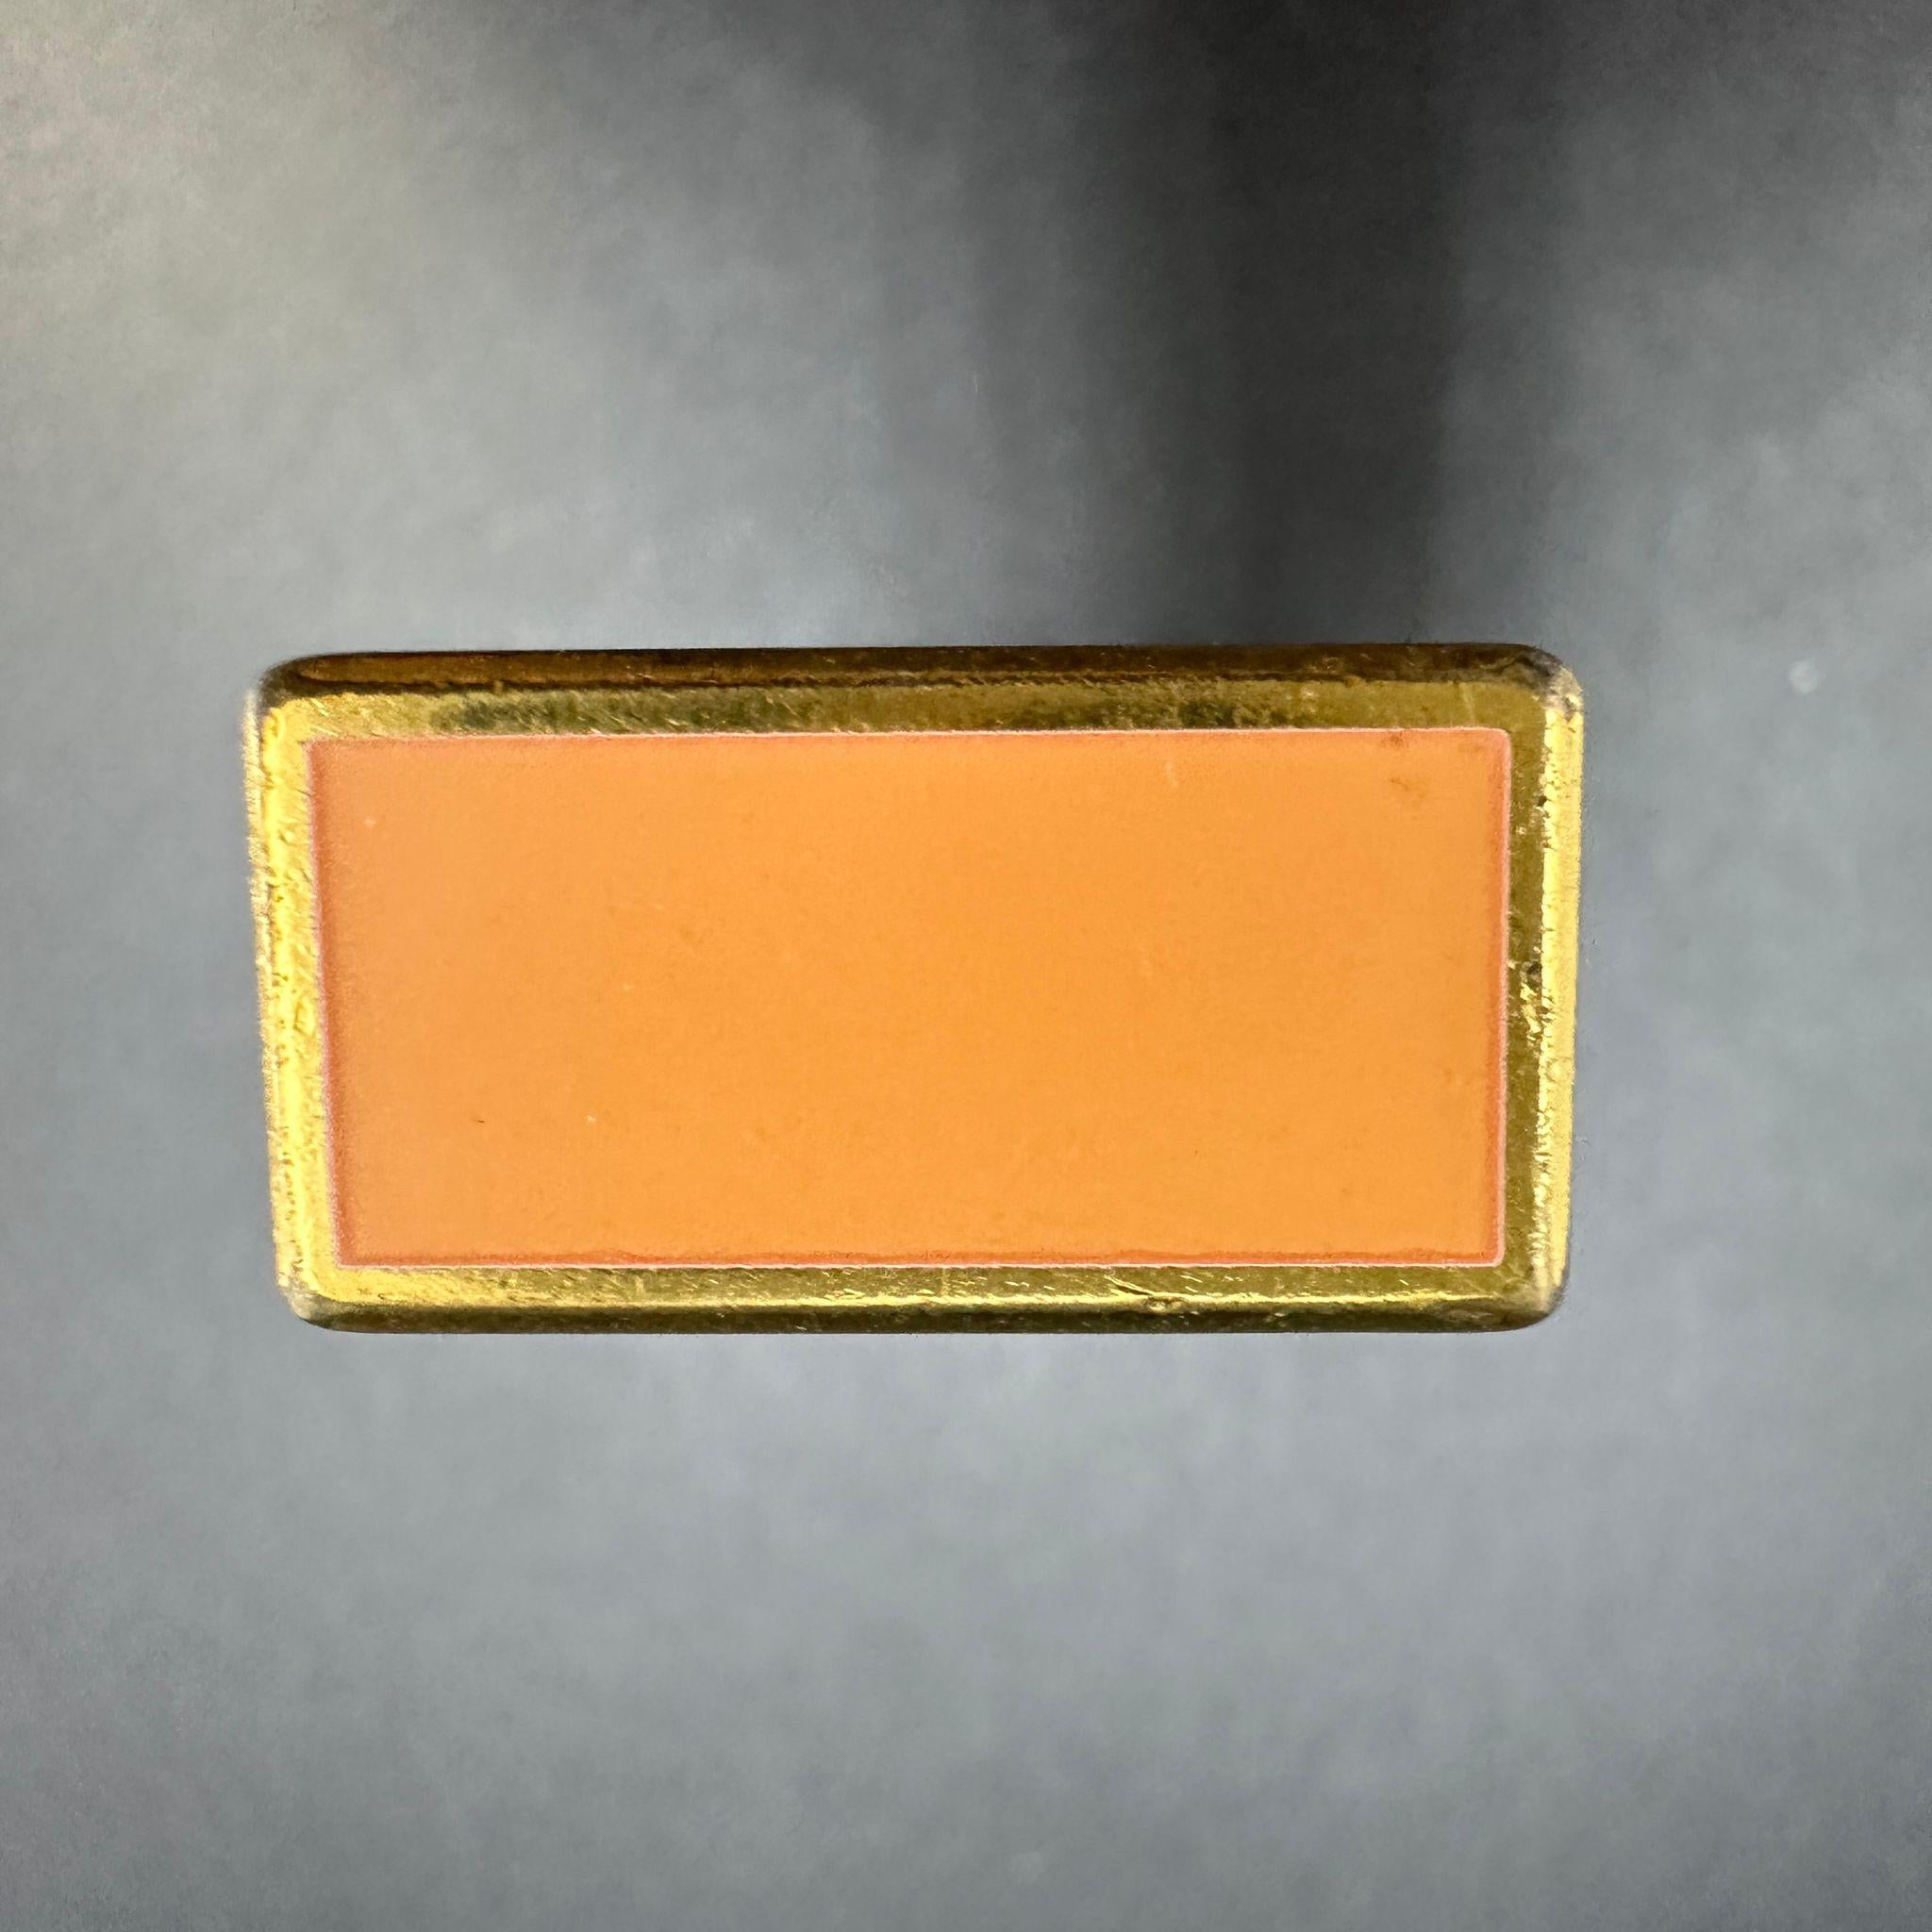 Vintage Vert Rare Circa 1980s Dunhill Orange Lacquer & Gold Plated Lighter
Retro style 
Comes with a Dunhill box and papers 
The lighter is in very good condition 
The lighter sparks, ignites and flames
The orange lacquer style is a very rare style